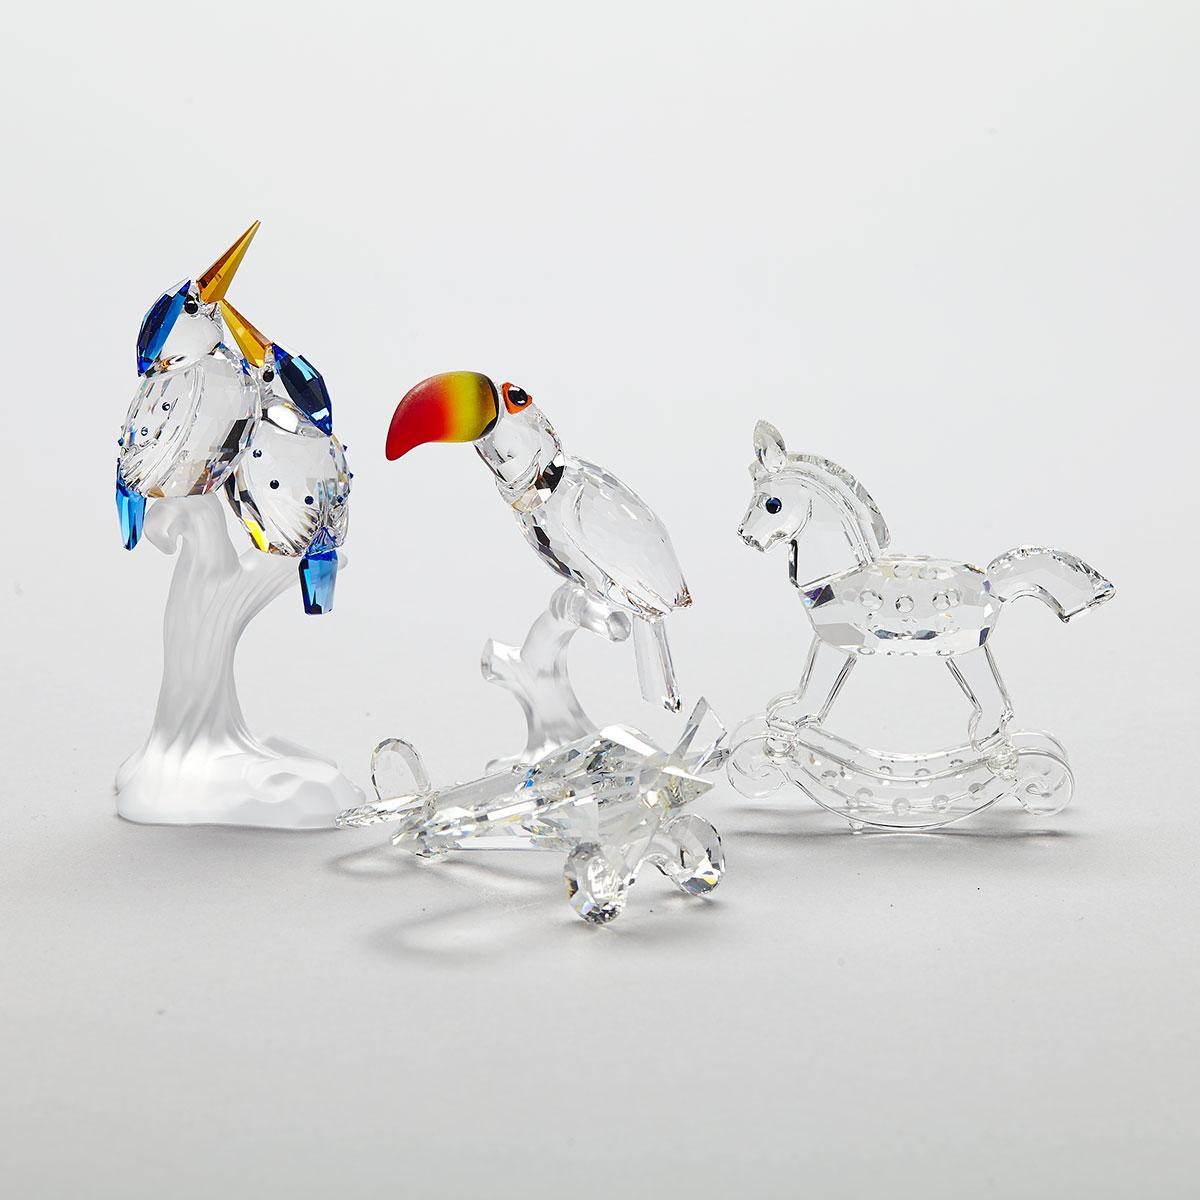 Four Swarovski Crystal Figurines, late 20th/early 21st century